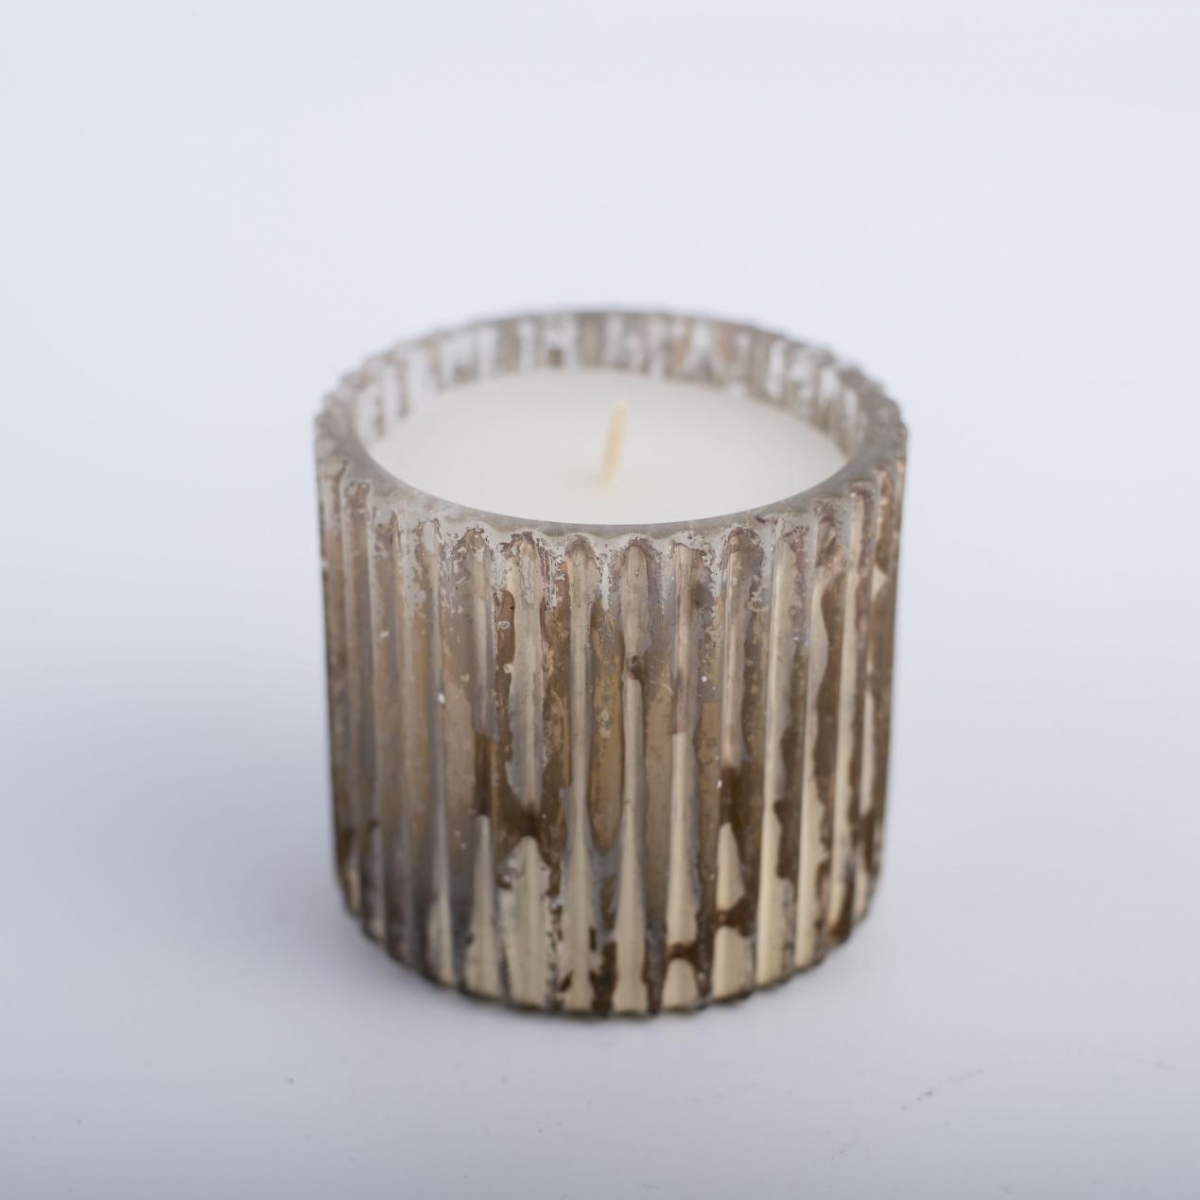 Essential Oil Candles – Retro Style ,Best Soy Wax ,Vegan Candles ,Scented Candles ,Engraved Glass Jar ,China Factory ,Price-HOWCANDLE-Candles,Scented Candles,Aromatherapy Candles,Soy Candles,Vegan Candles,Jar Candles,Pillar Candles,Candle Gift Sets,Essential Oils,Reed Diffuser,Candle Holder,